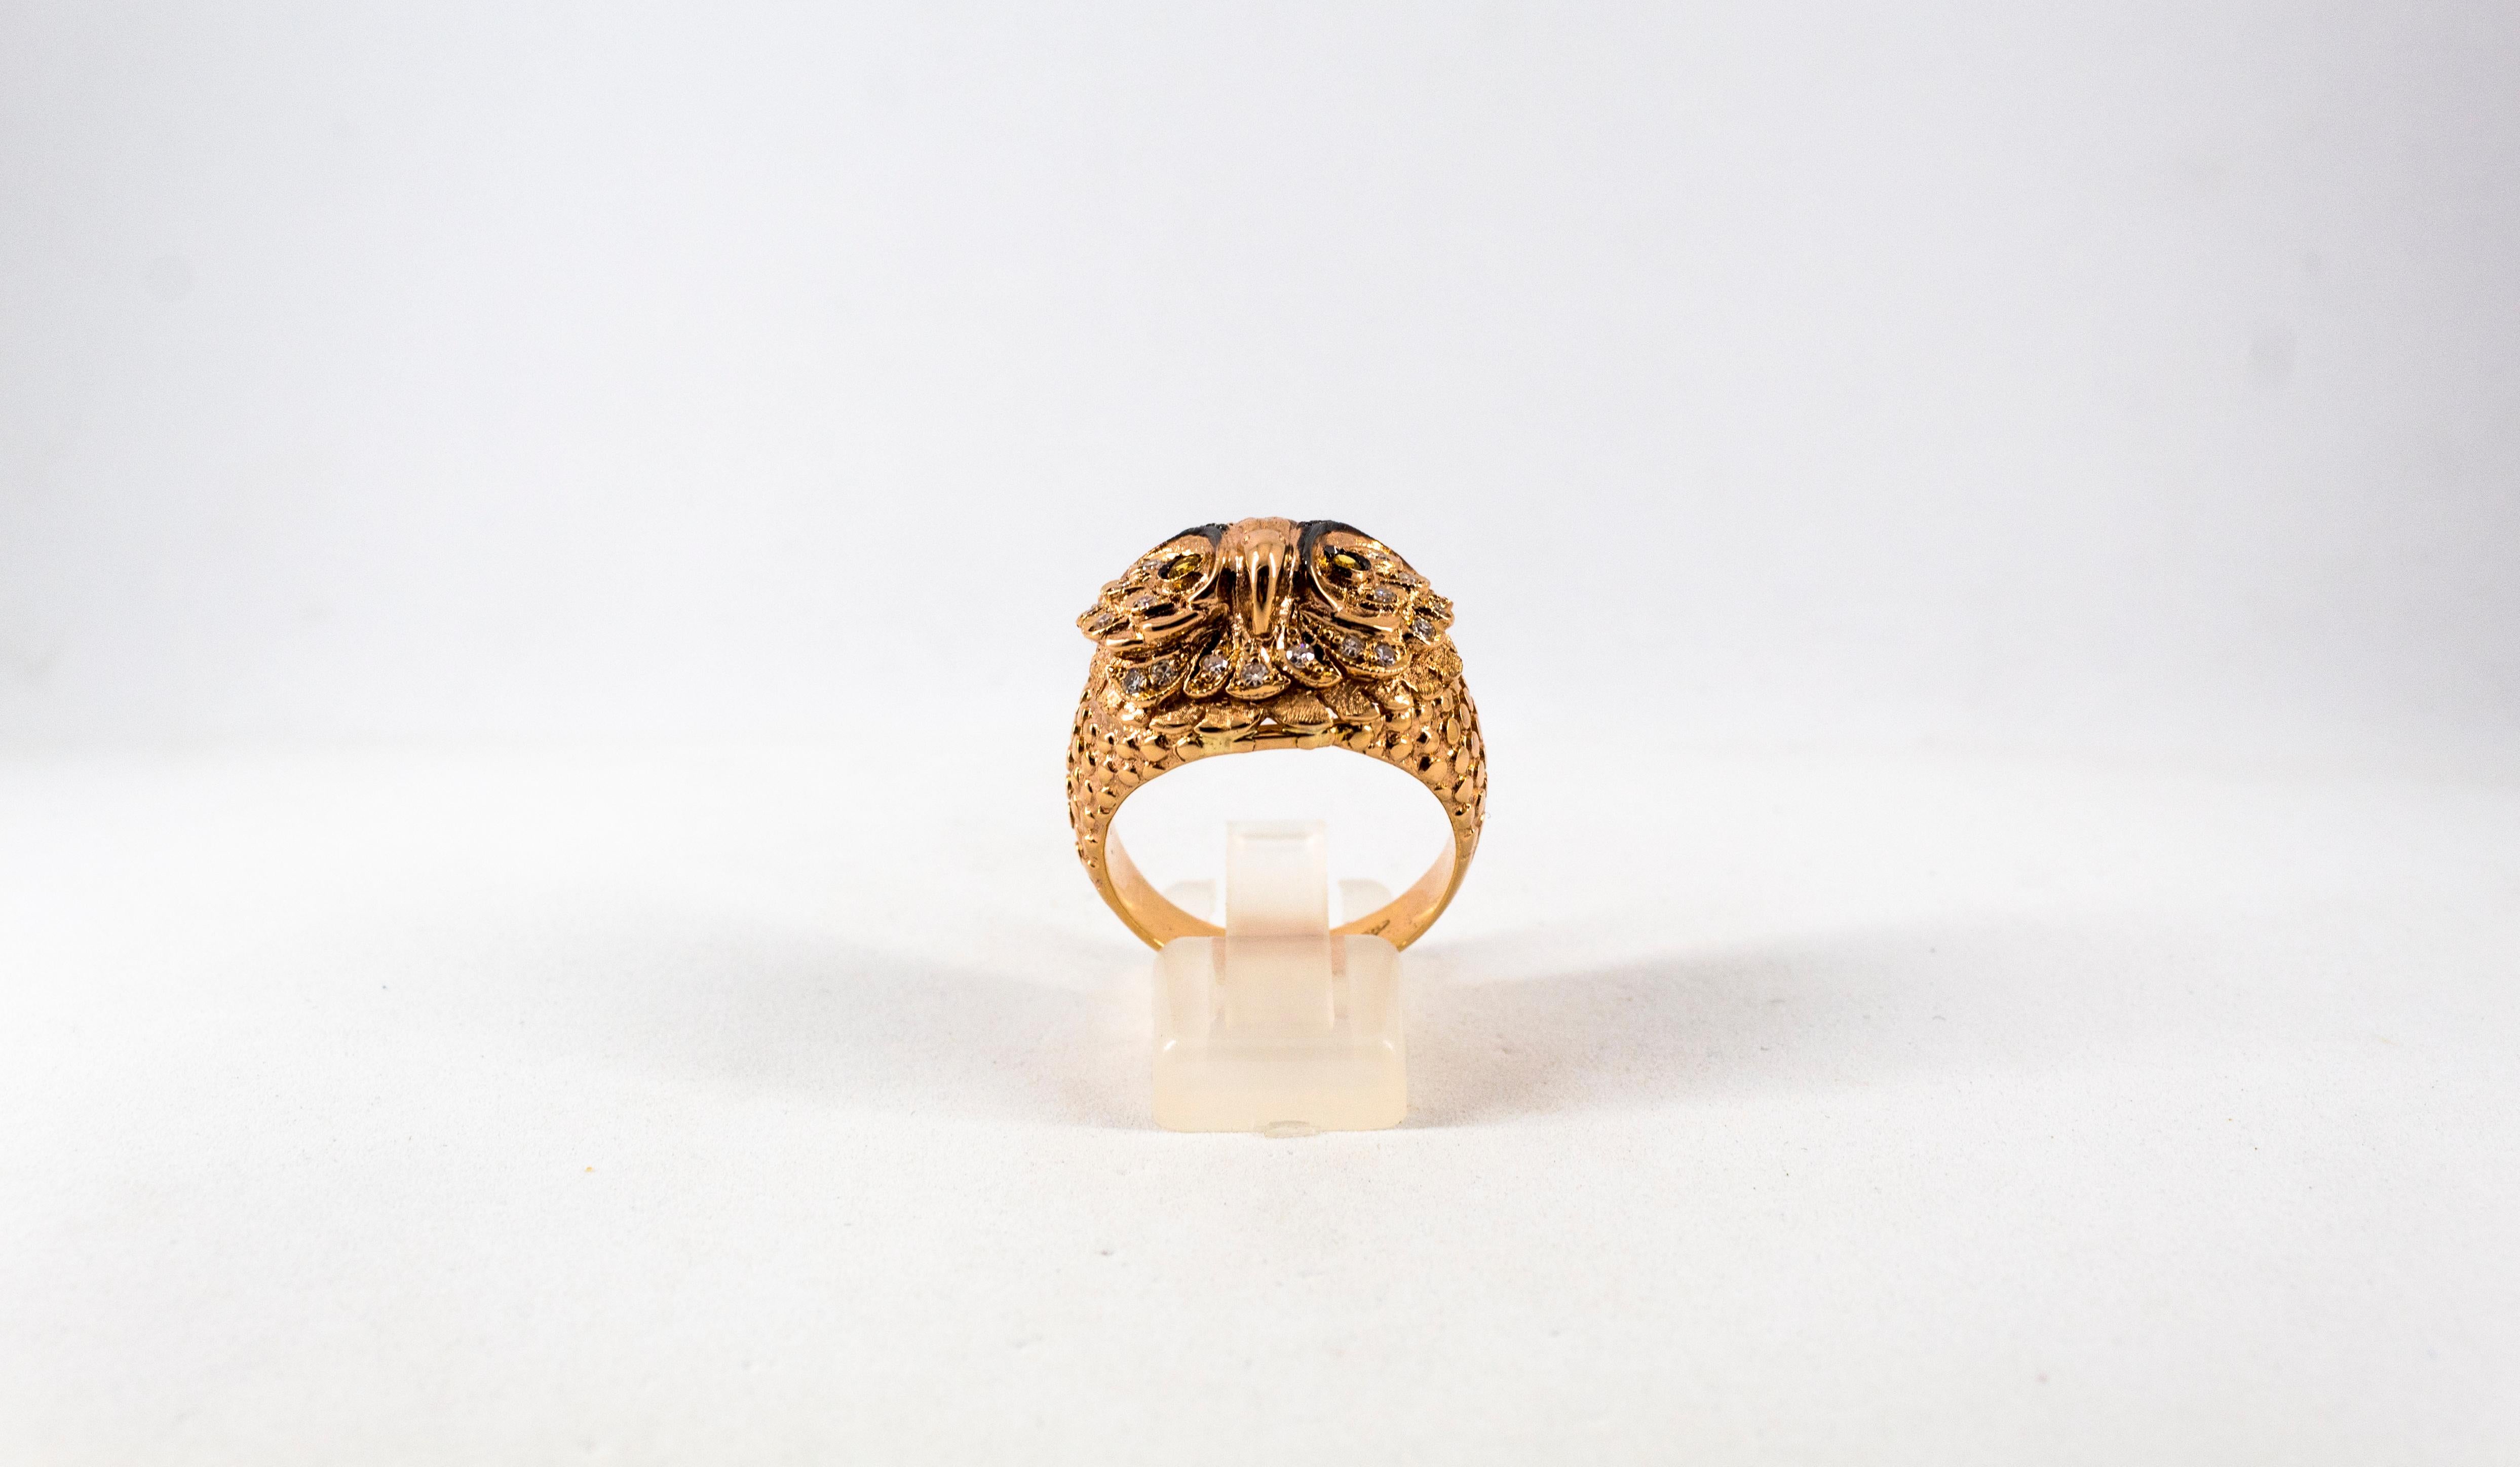 This Ring is made of 14K Rose Gold.
This Ring has 0.42 Carats of White Diamonds.
This Ring has 0.13 Carats of Black Diamonds.
This Ring has 0.10 Carats of Yellow Sapphires.
Size ITA: 22 USA: 10
We're a workshop so every piece is handmade,